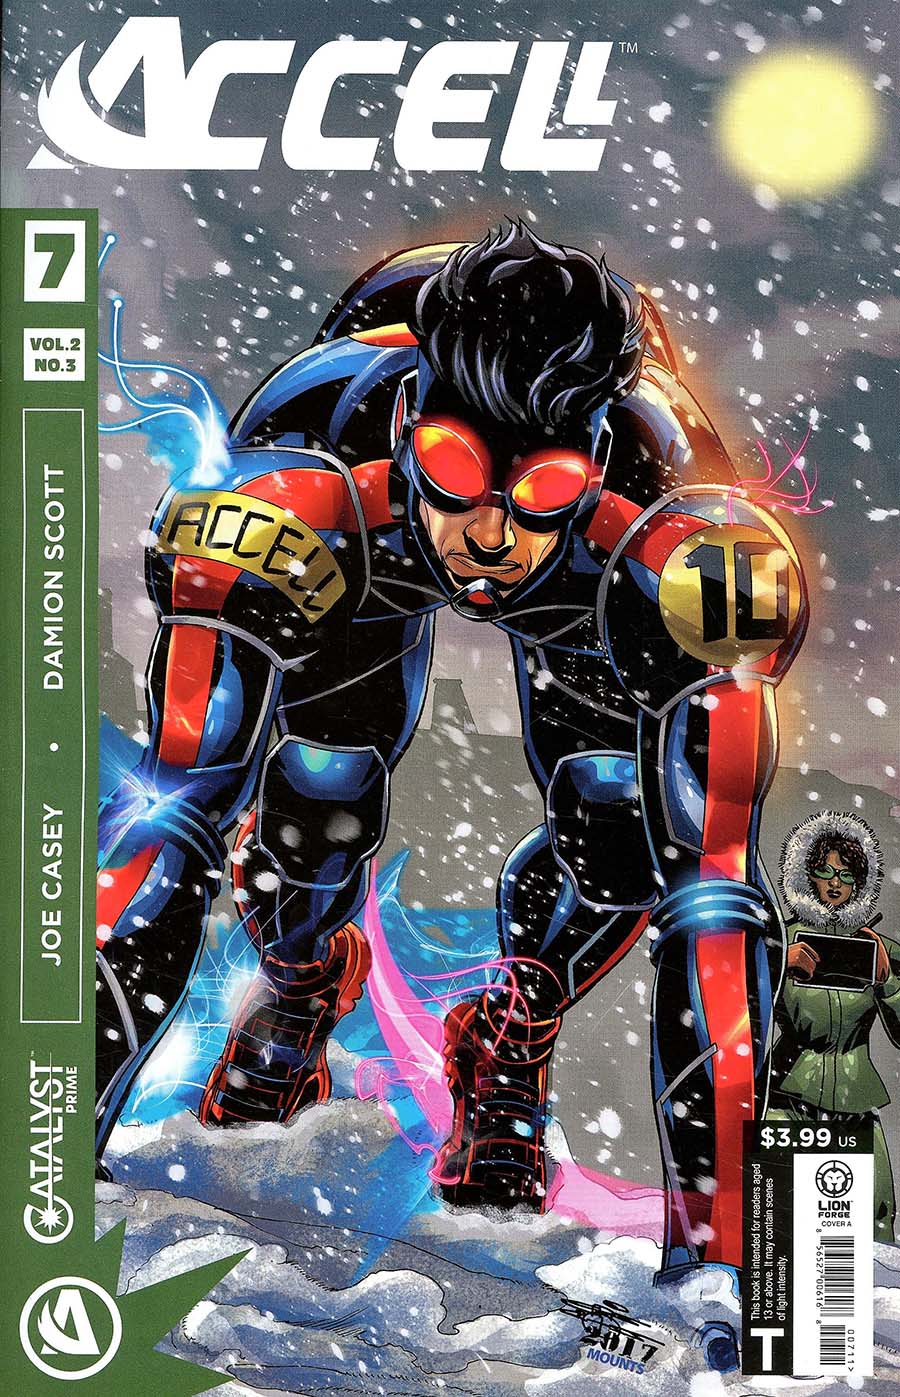 Catalyst Prime Accell #7